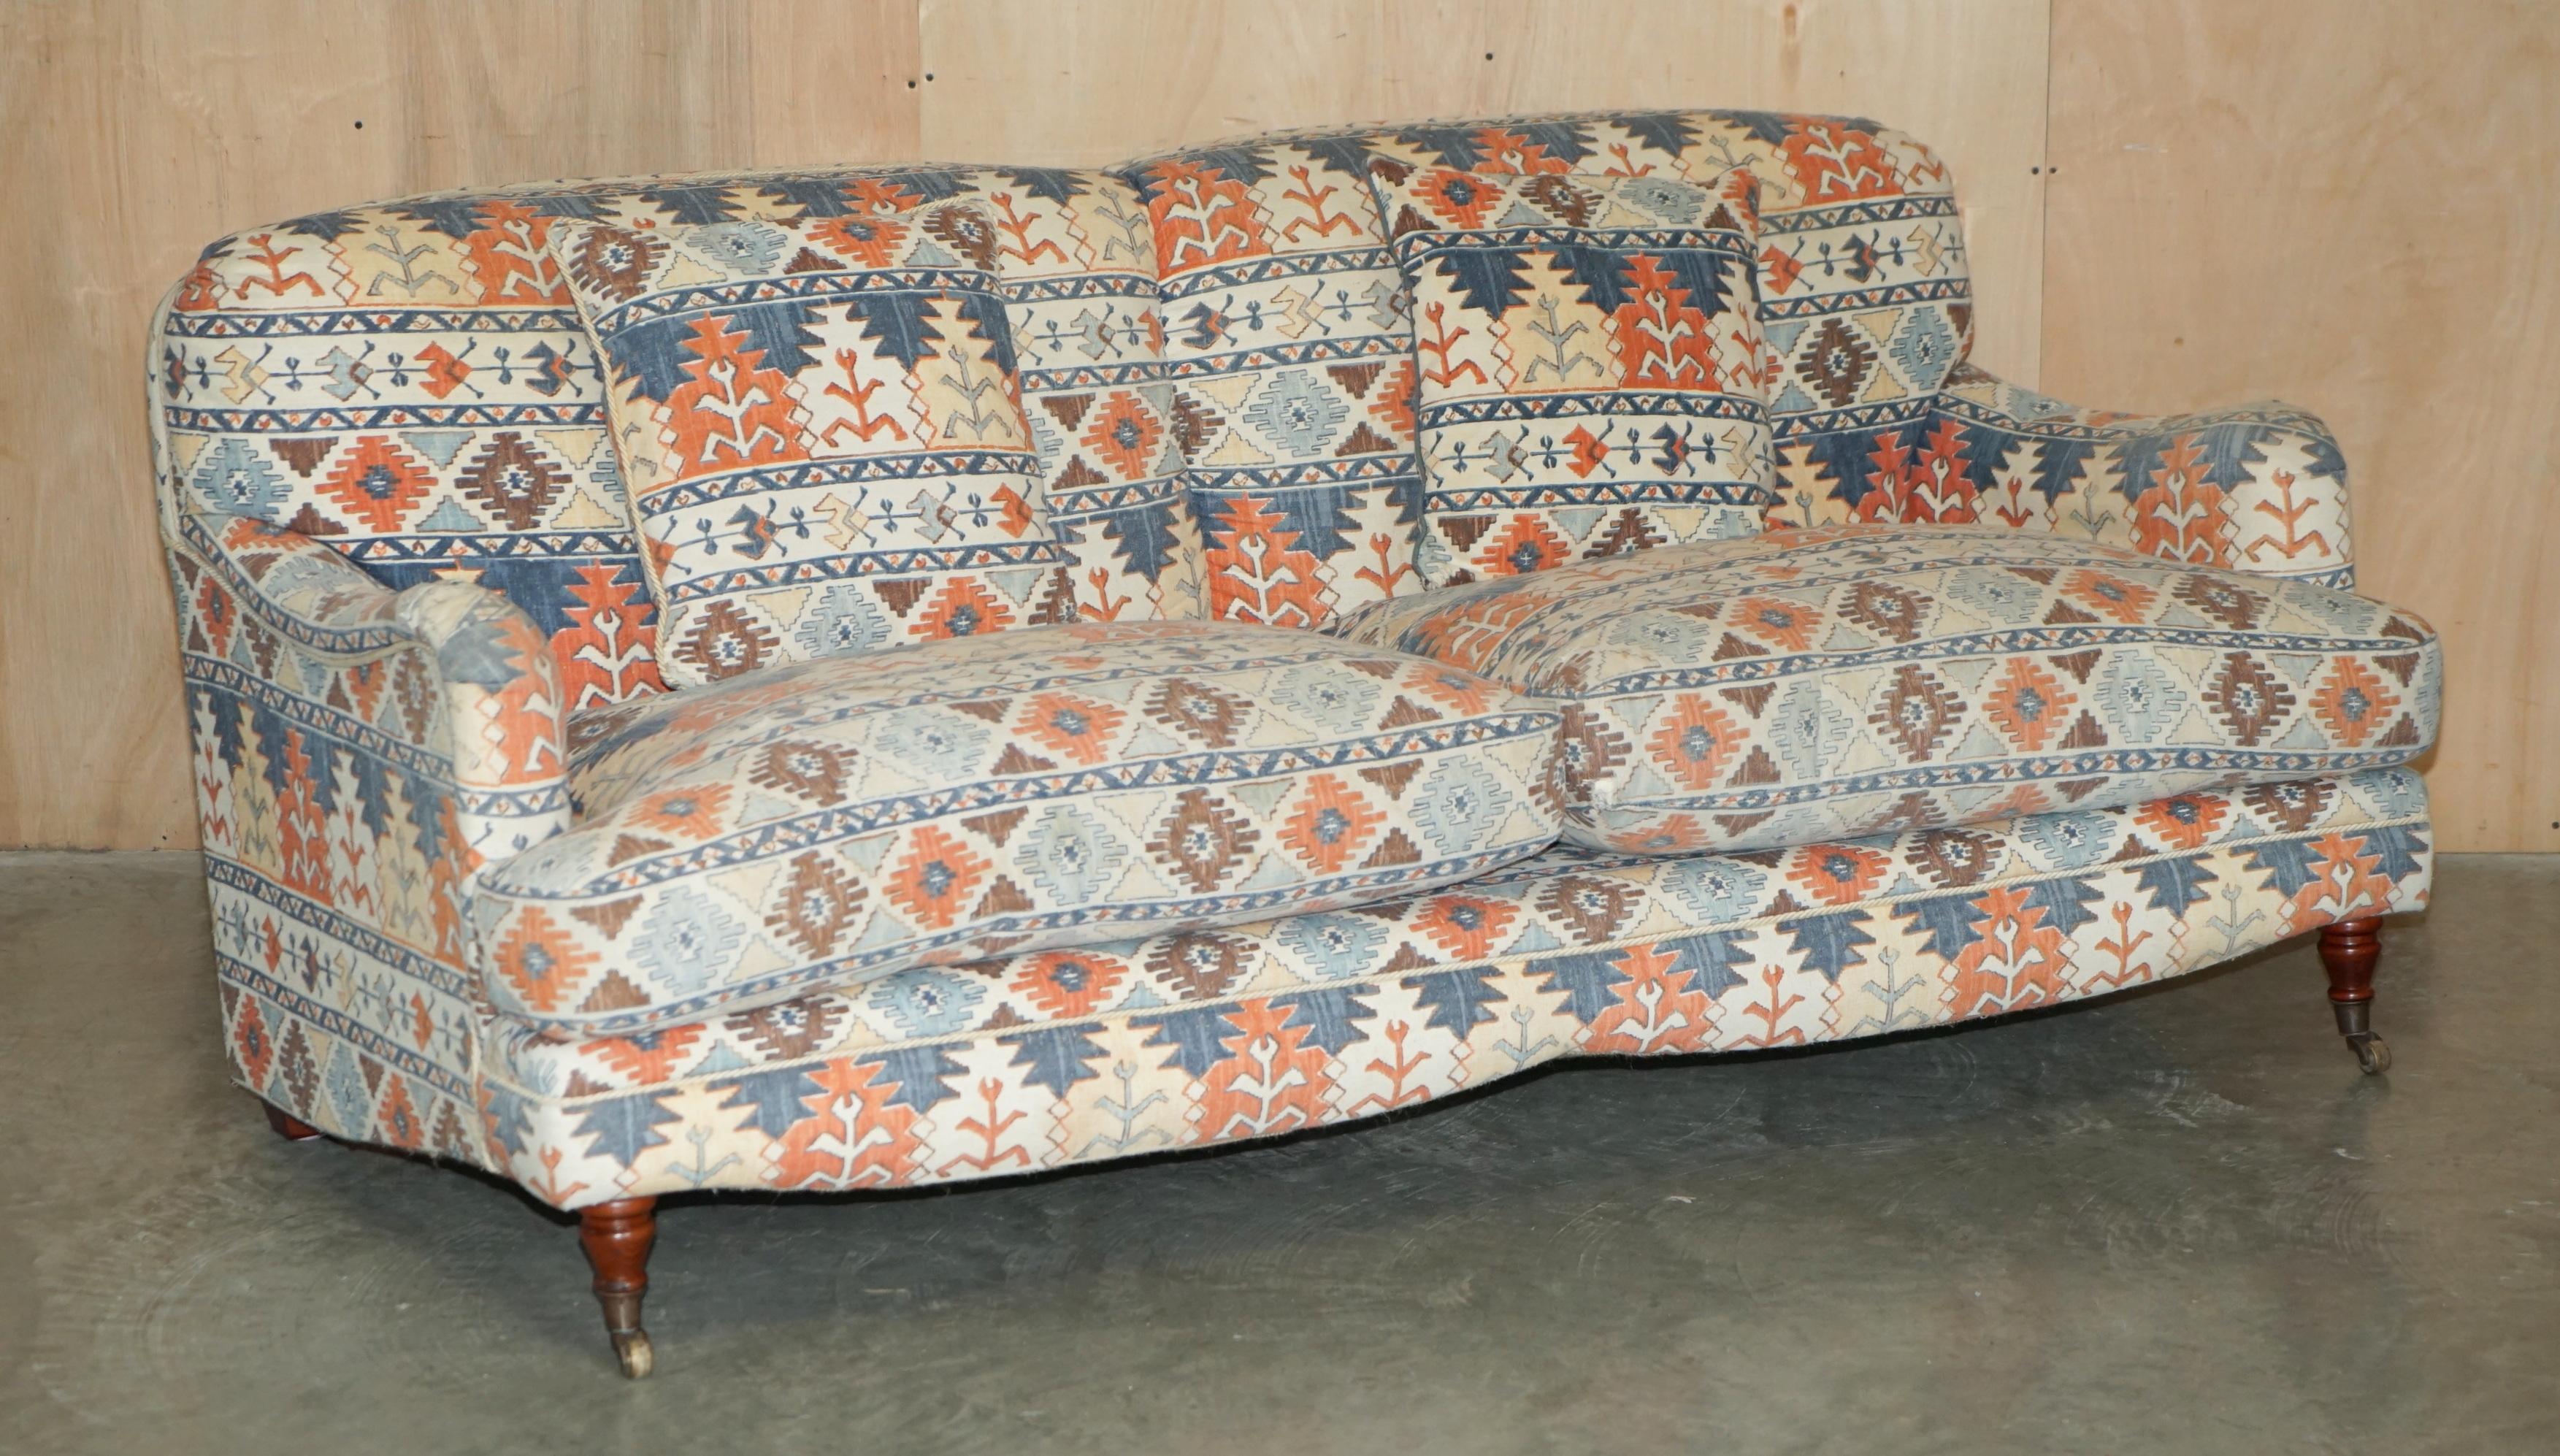 Royal House Antiques

Royal House Antiques is delighted to offer for sale this lovely vintage Howard & Son's style sofa and armchair suite with distressed Kilim style upholstery 

Please note the delivery fee listed is just a guide, it covers within